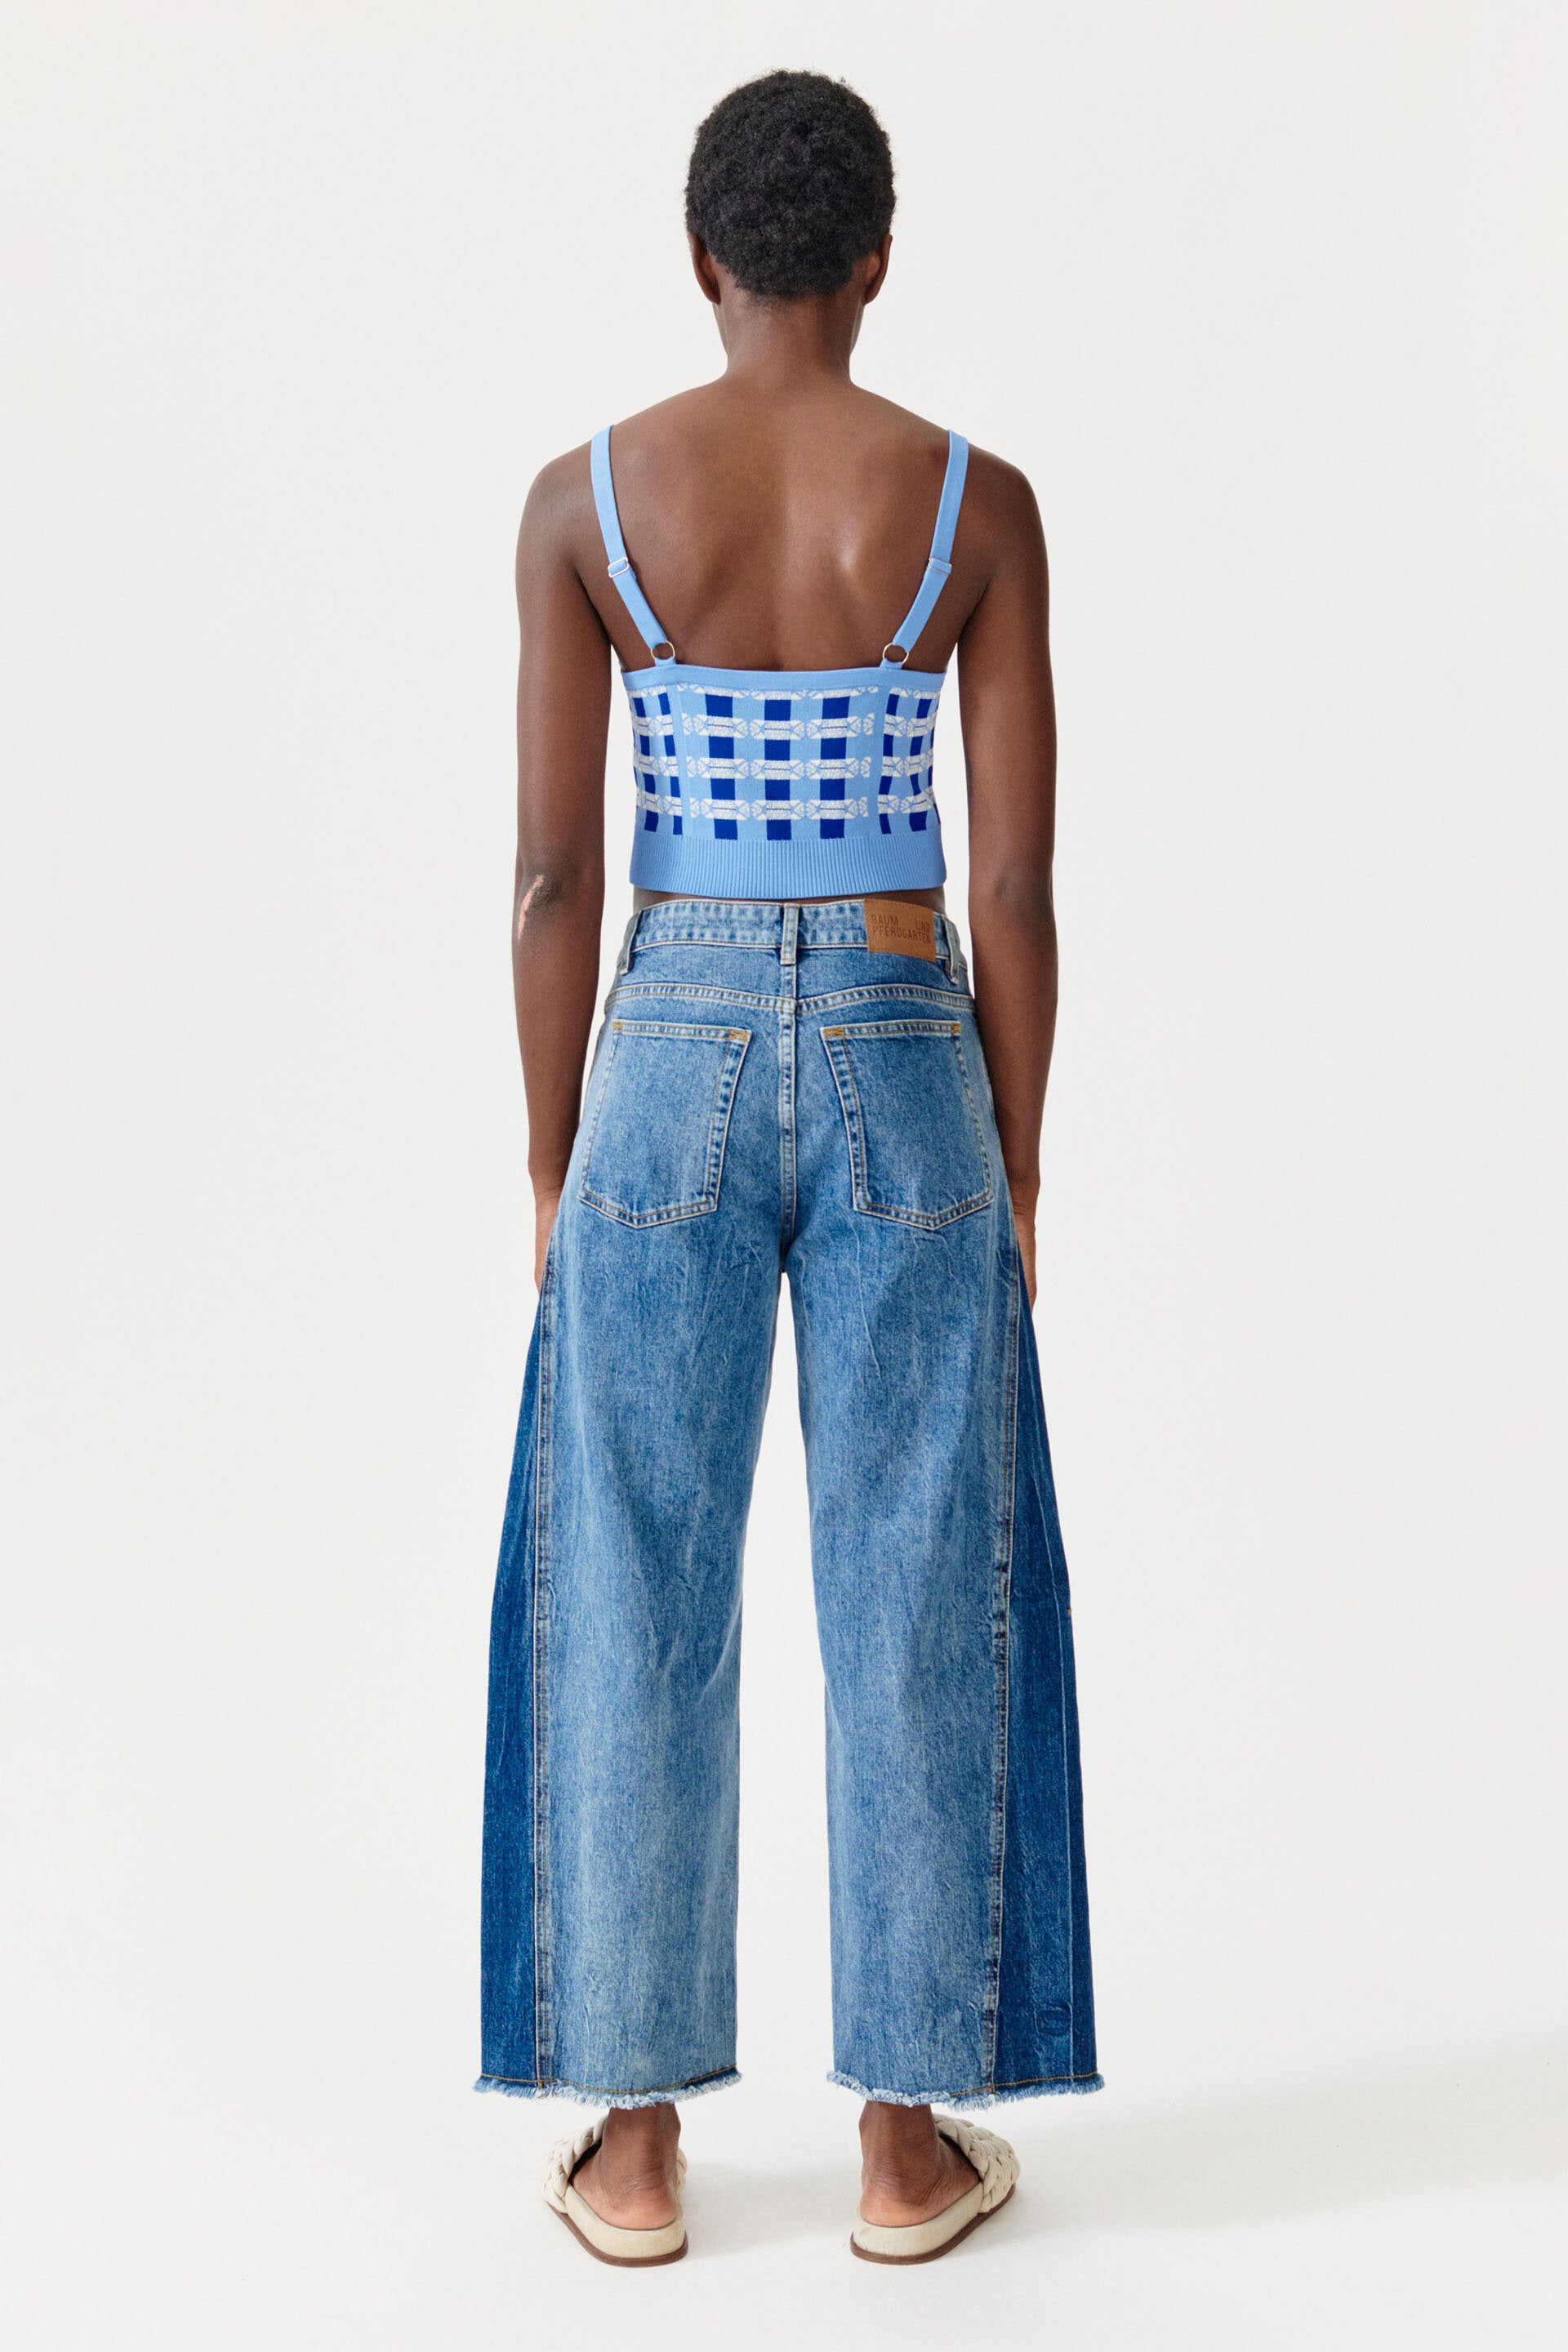 Cypre Top in Blue Check